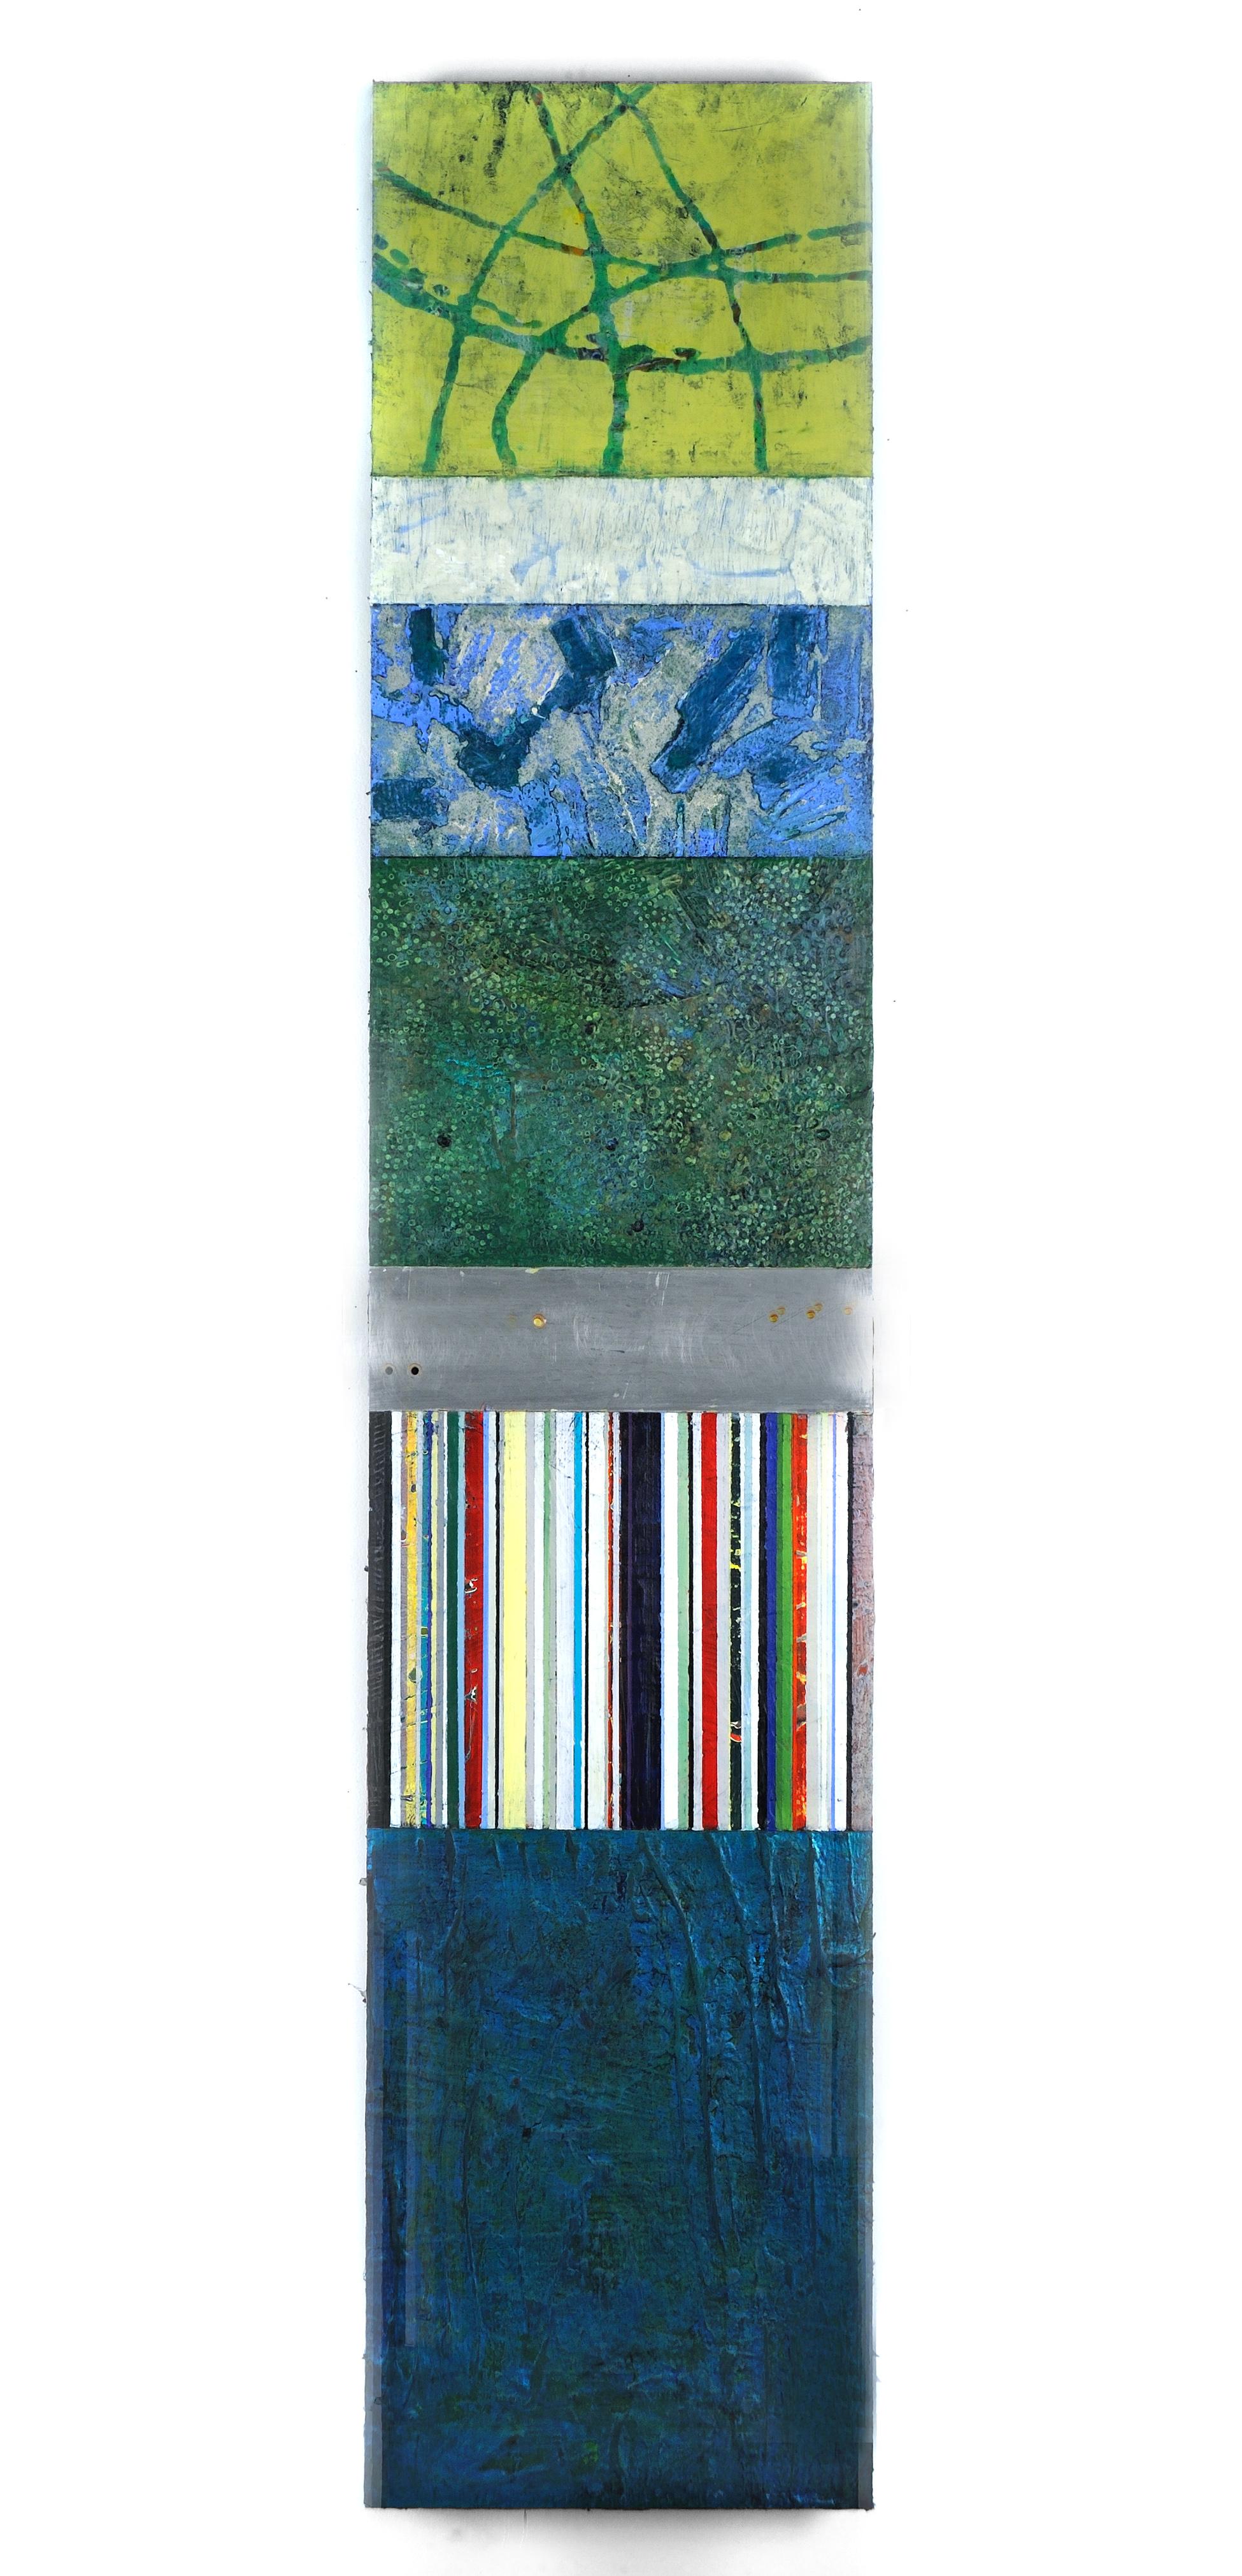 Francie Hester Abstract Painting - Strata 18-1, acrylic and wax on metal, 58 x 12 inches. Blue and green sectors